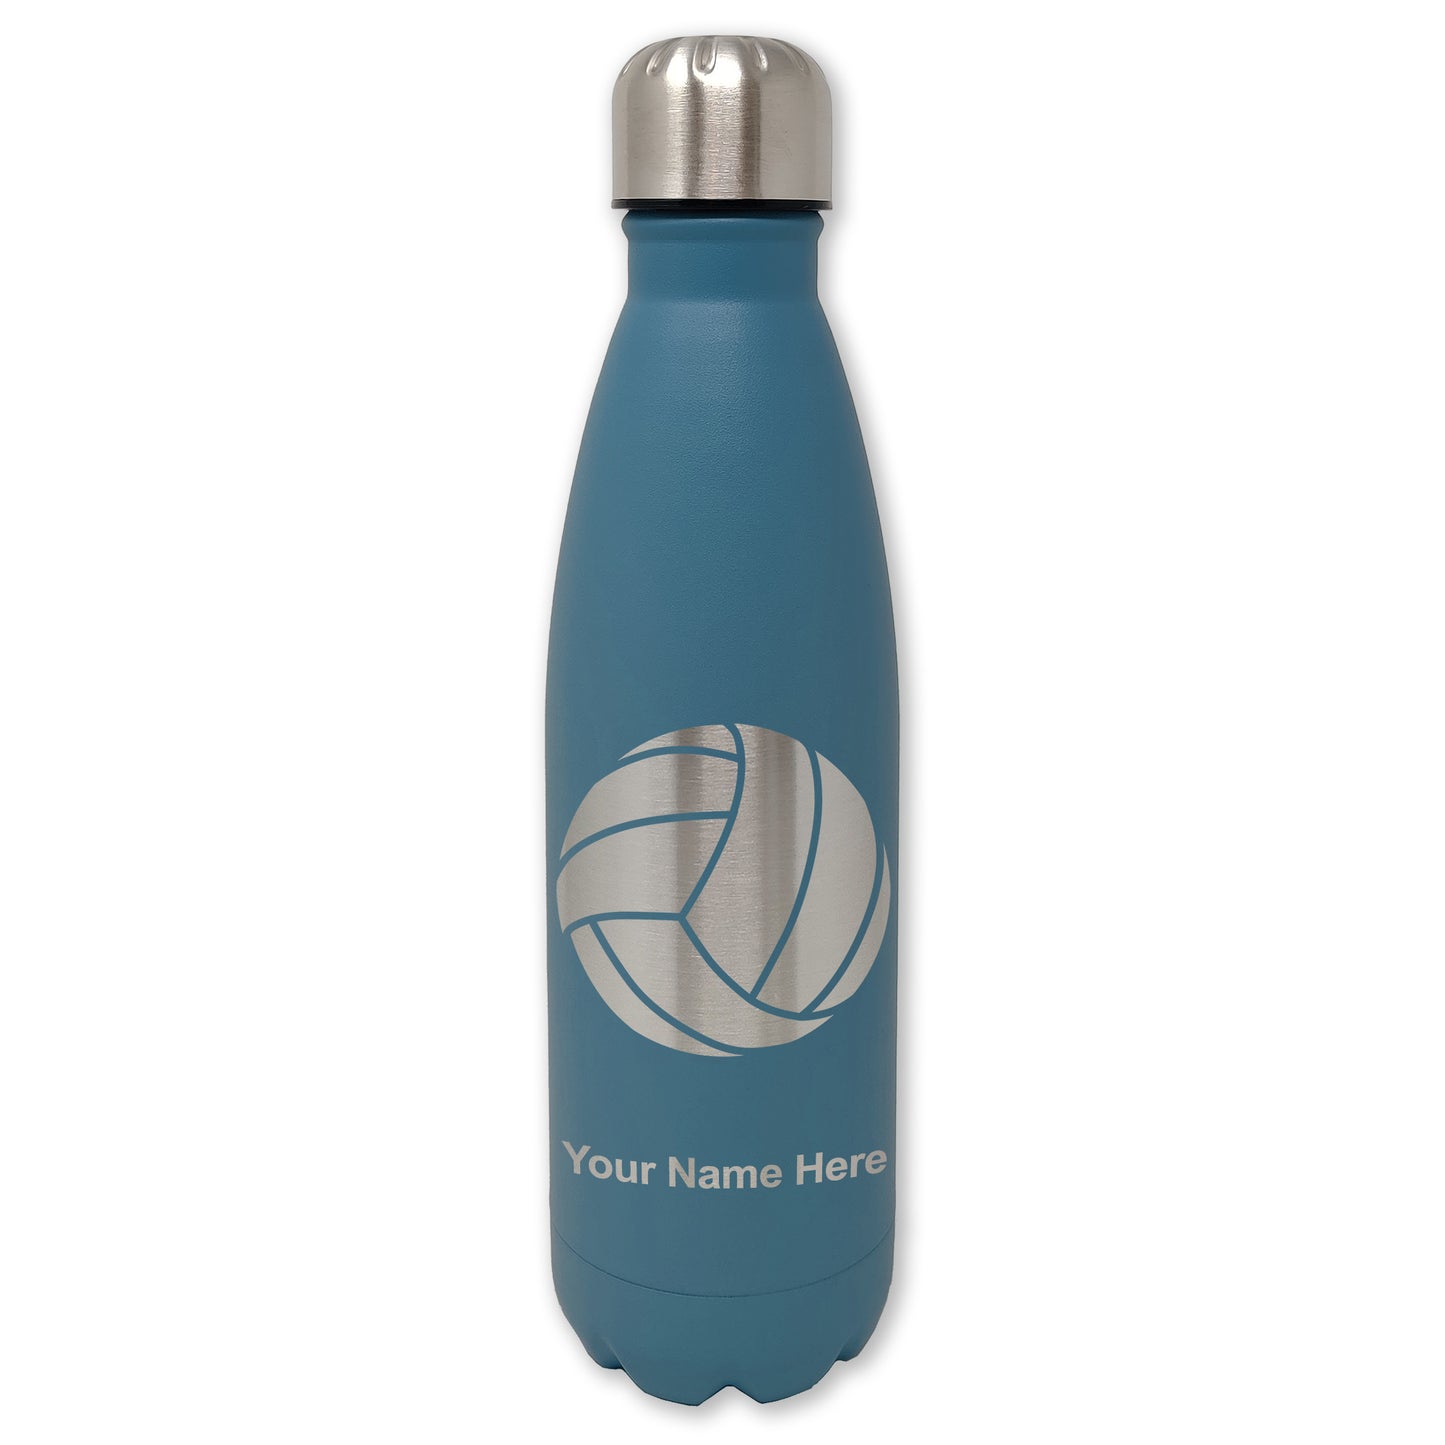 LaserGram Double Wall Water Bottle, Volleyball Ball, Personalized Engraving Included